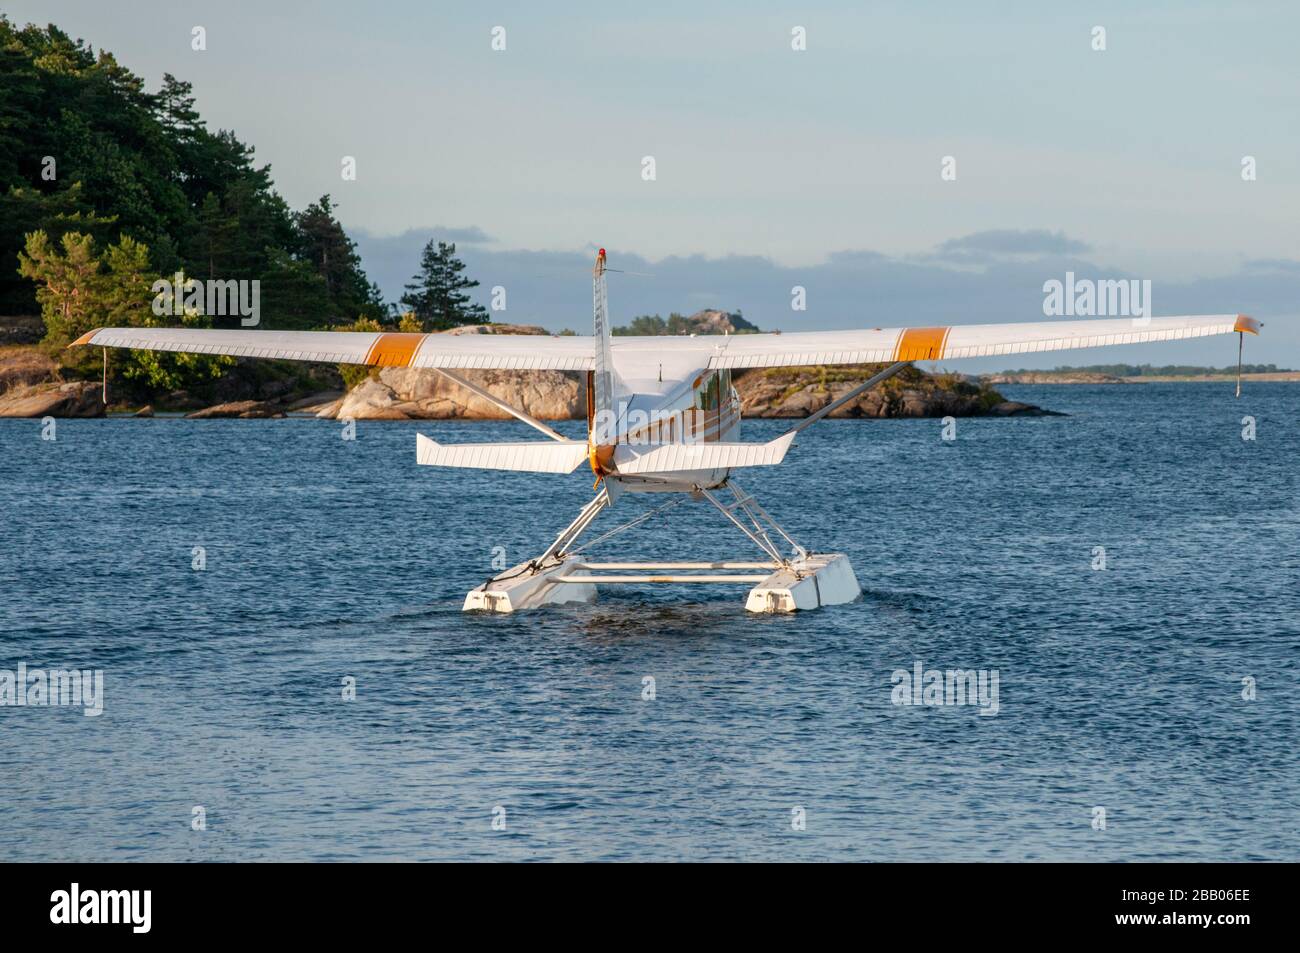 A yellow and white Cessna 172 Skyhawk seaplane taxiing out for takeoff among islands in the Kragerø archipelago on south coast of Norway. Stock Photo